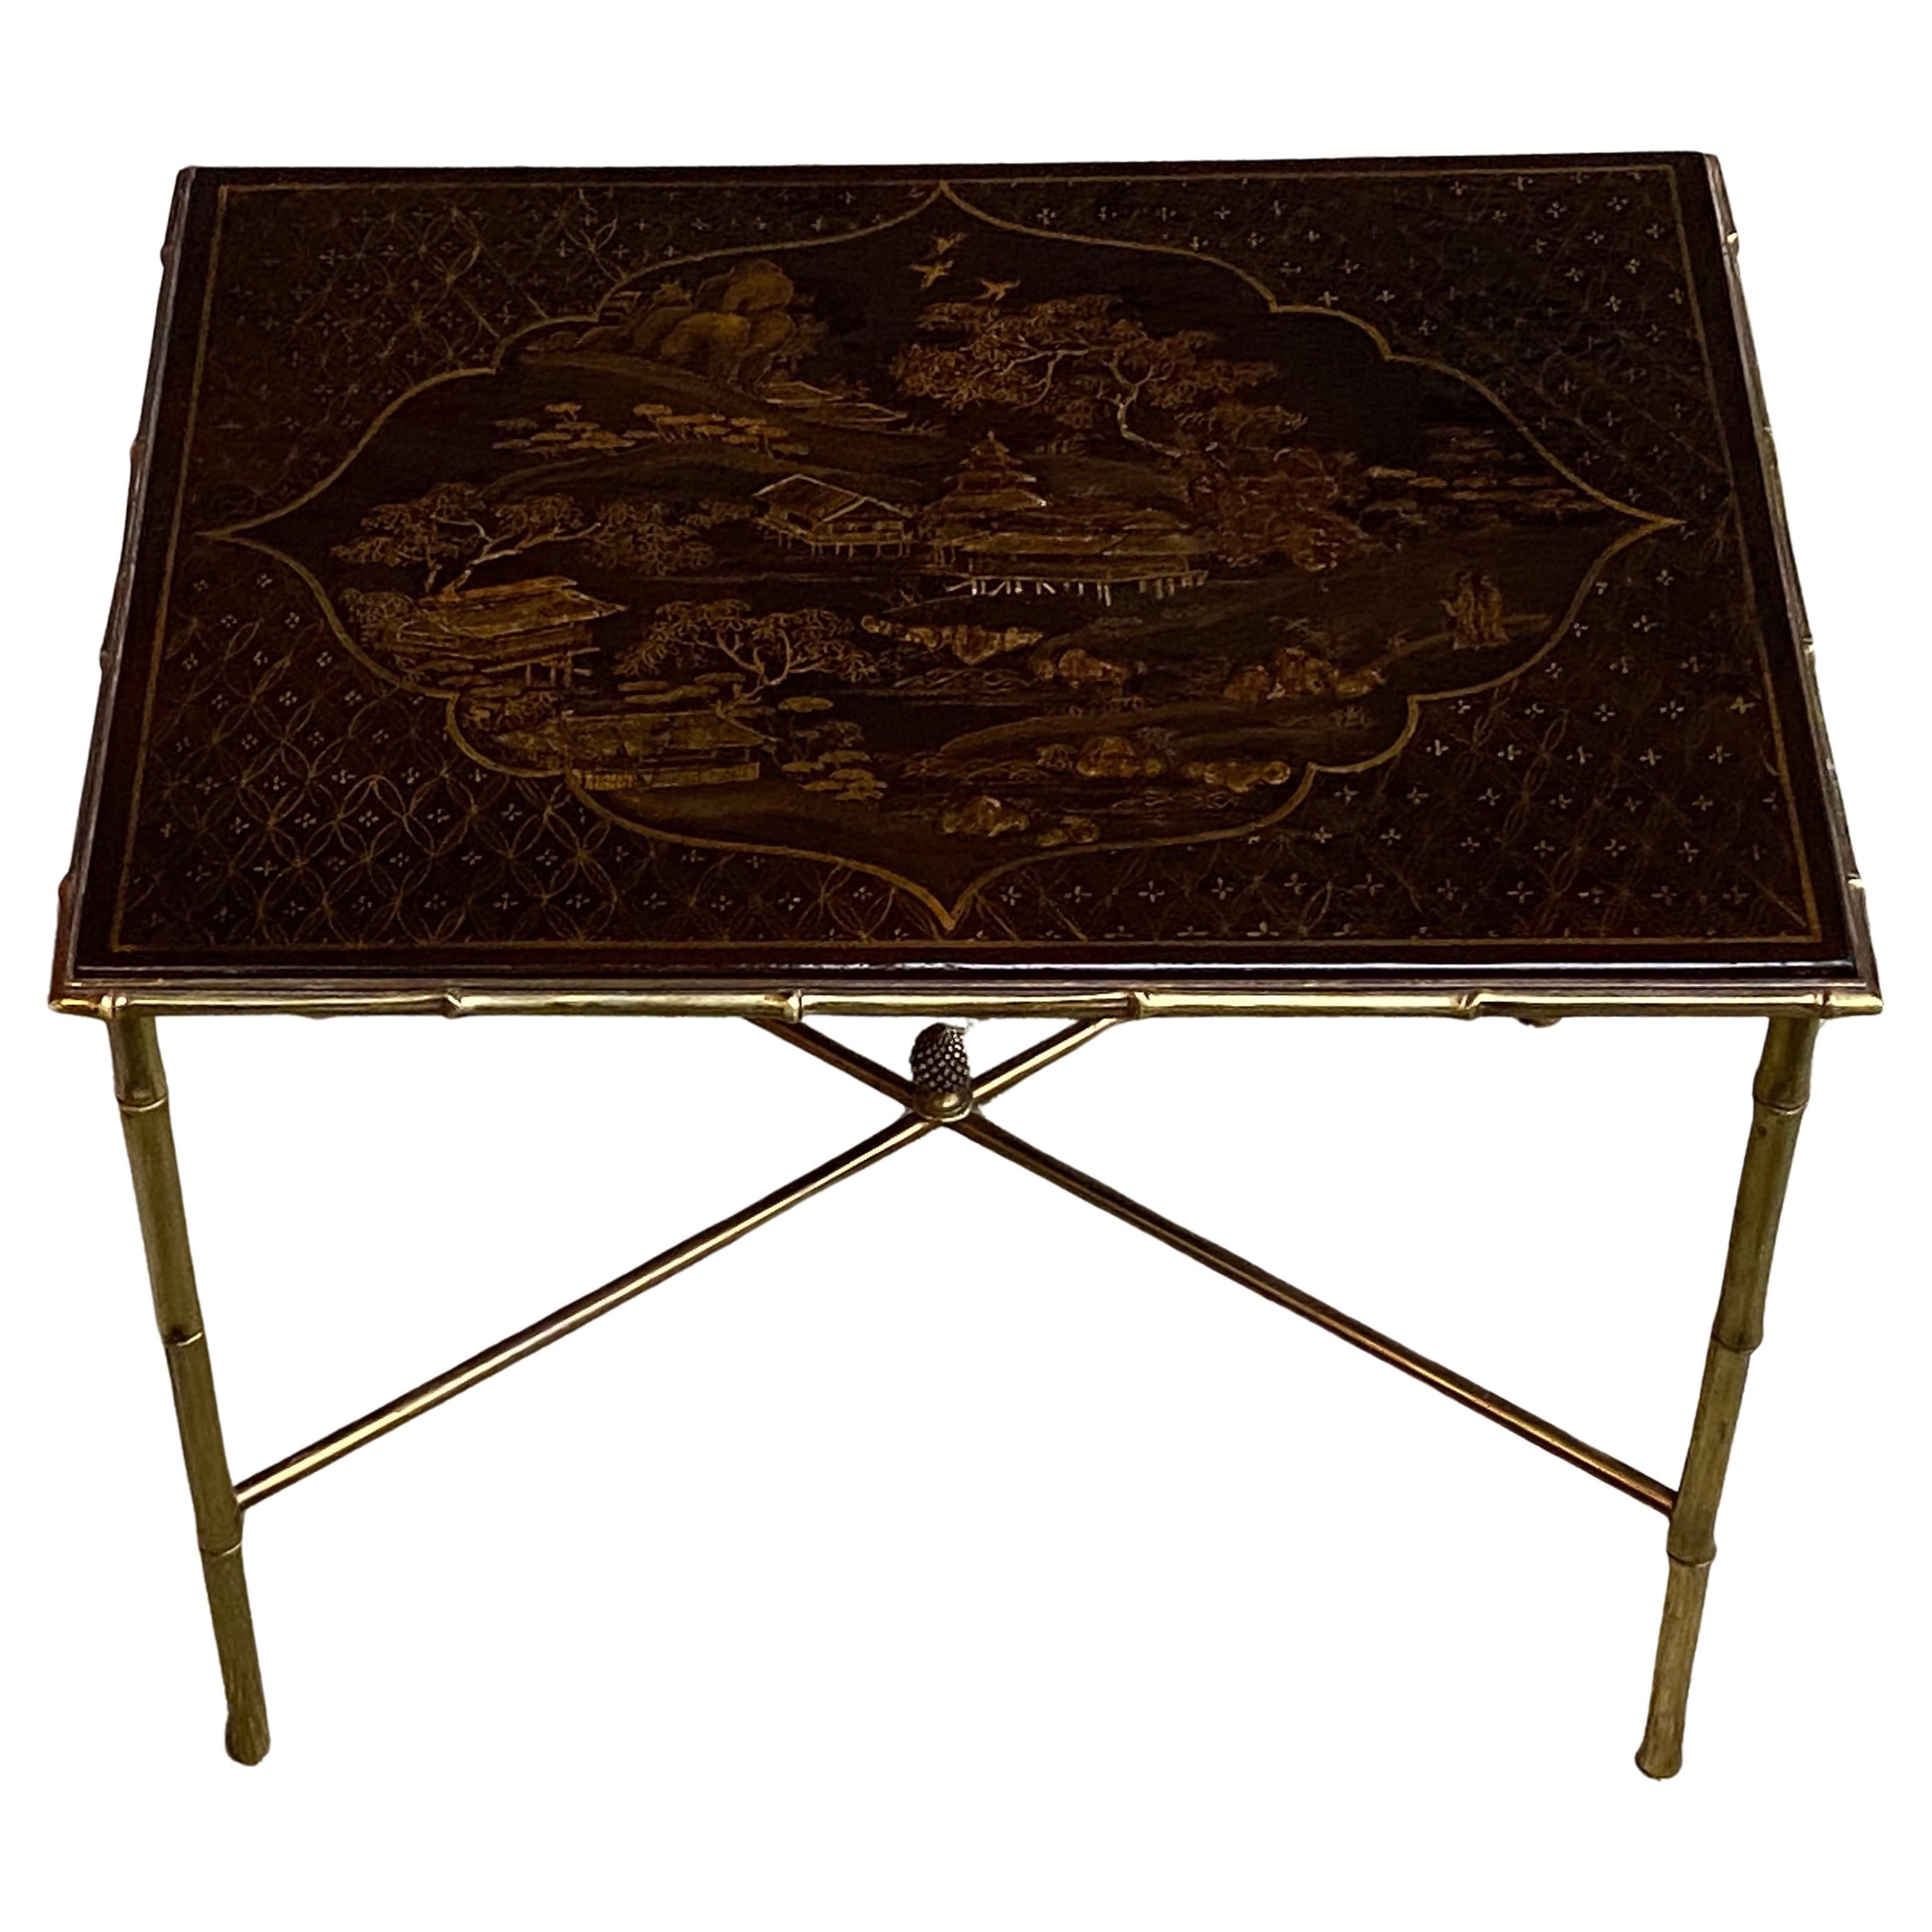 1950 ′ Maison Baguès or Jansen Table Bamboo Decor in Gilt Bronze with China Lacq For Sale